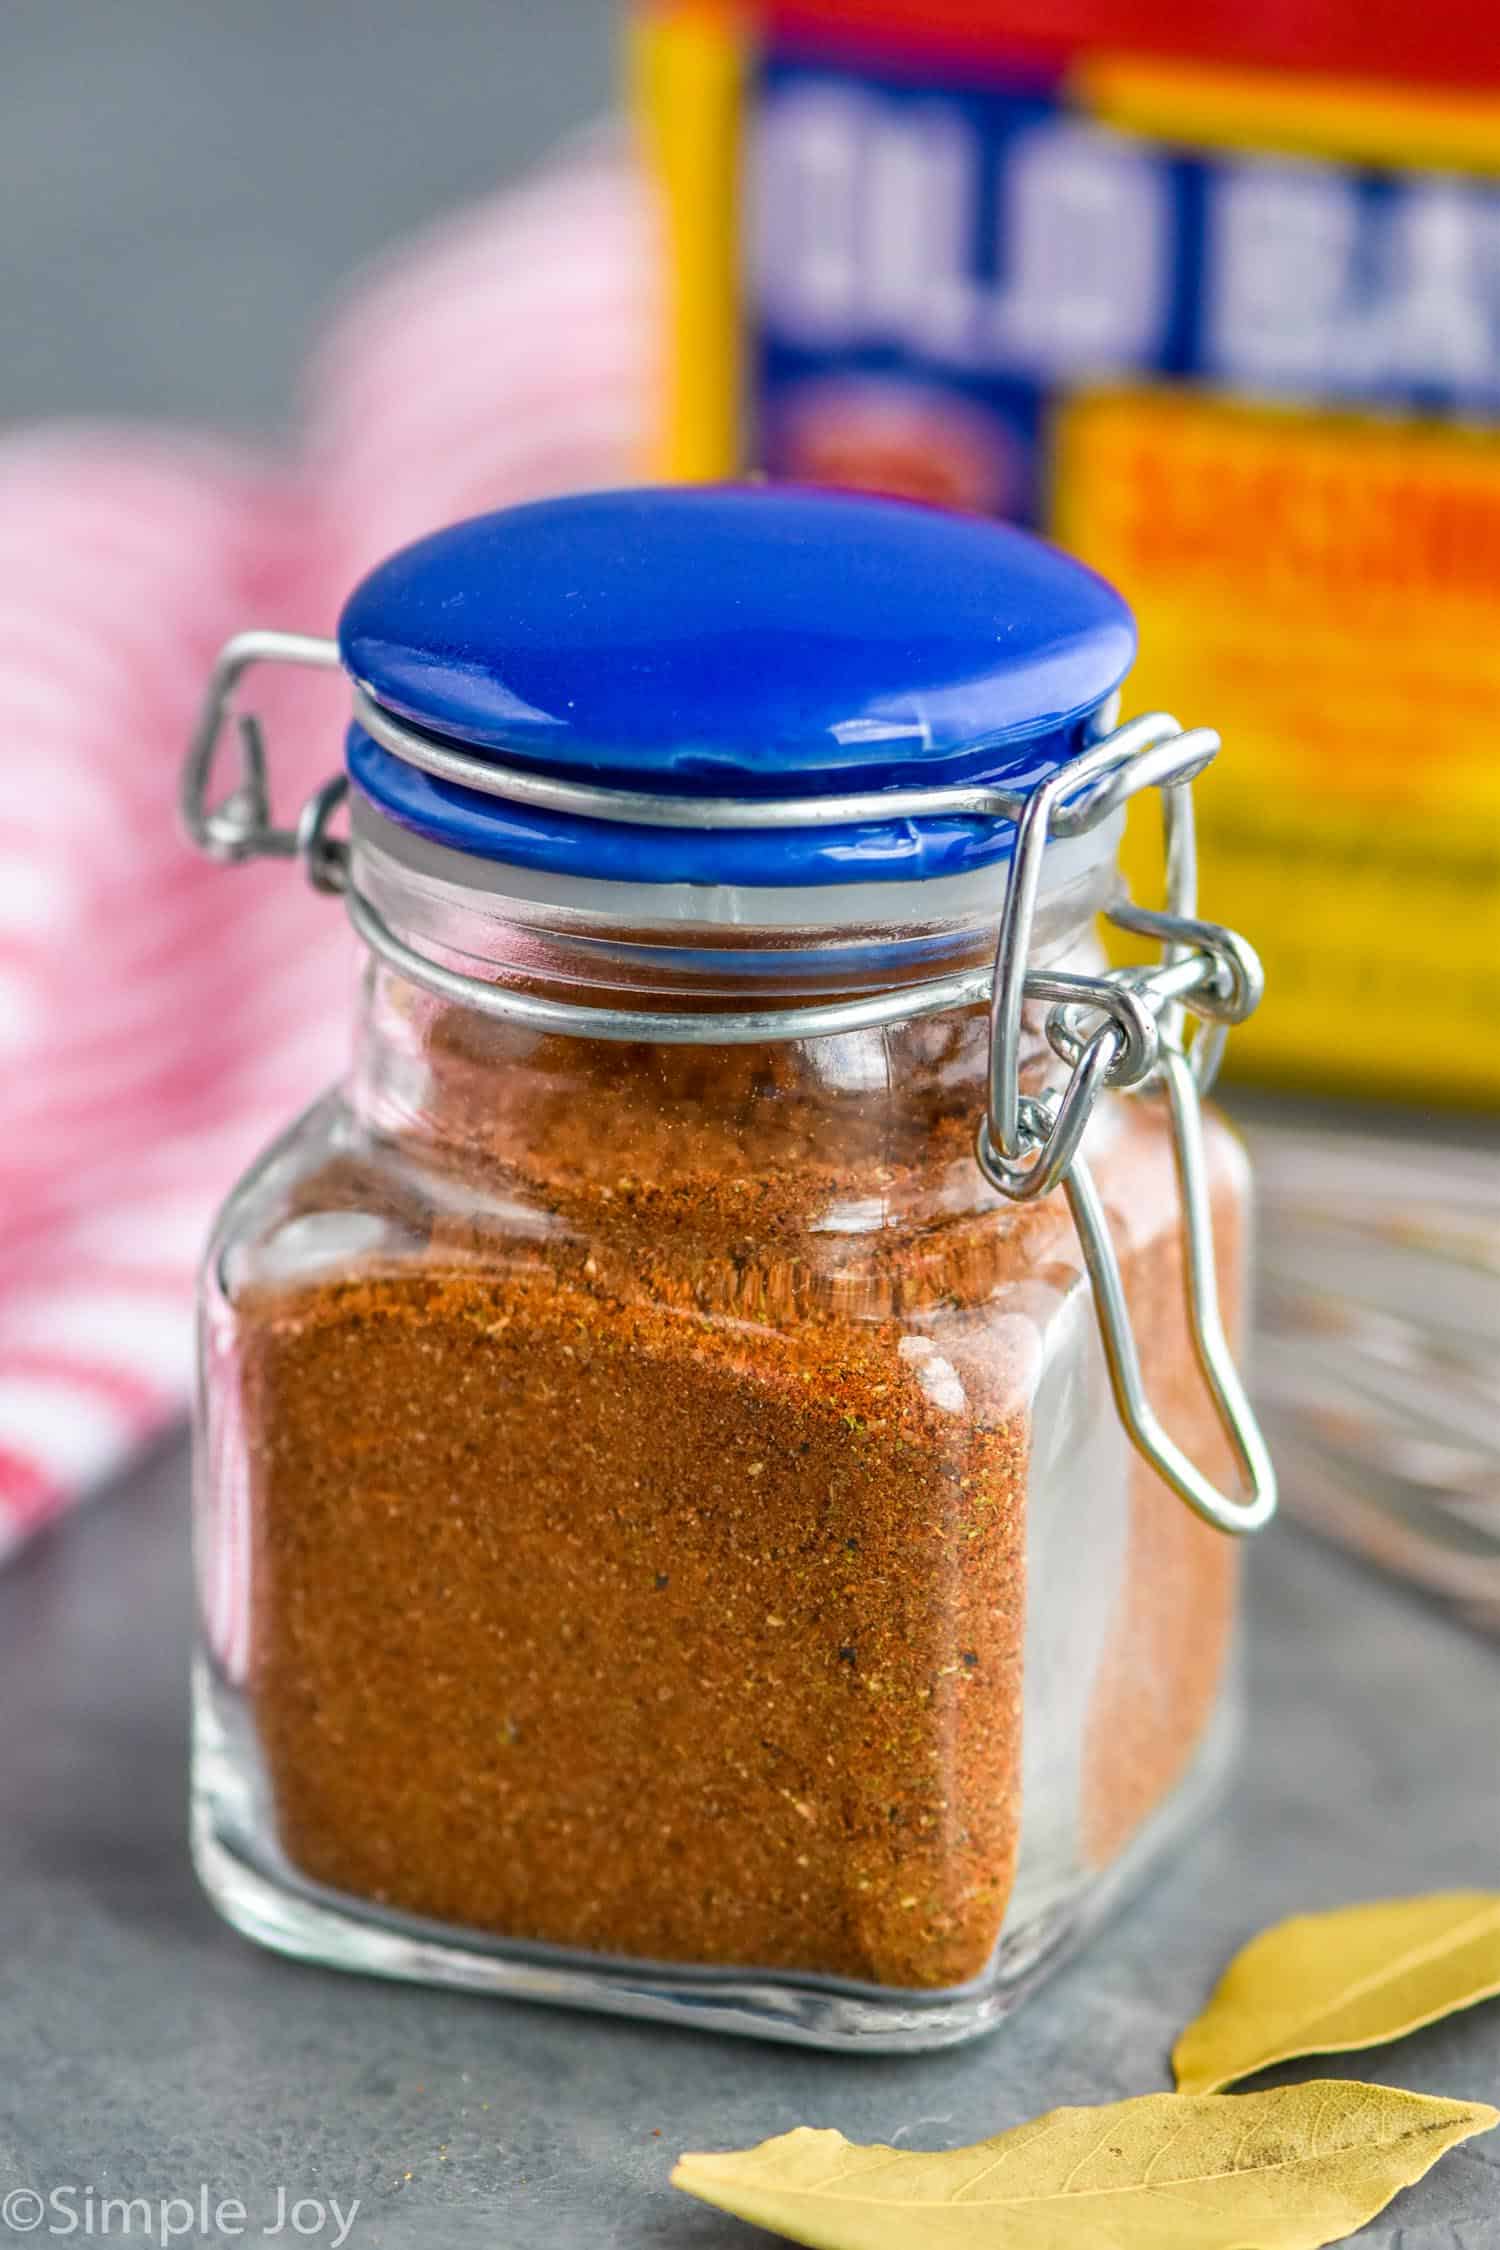 Throw Away McCormick Spices - How to Tell If Spices Are Too Old